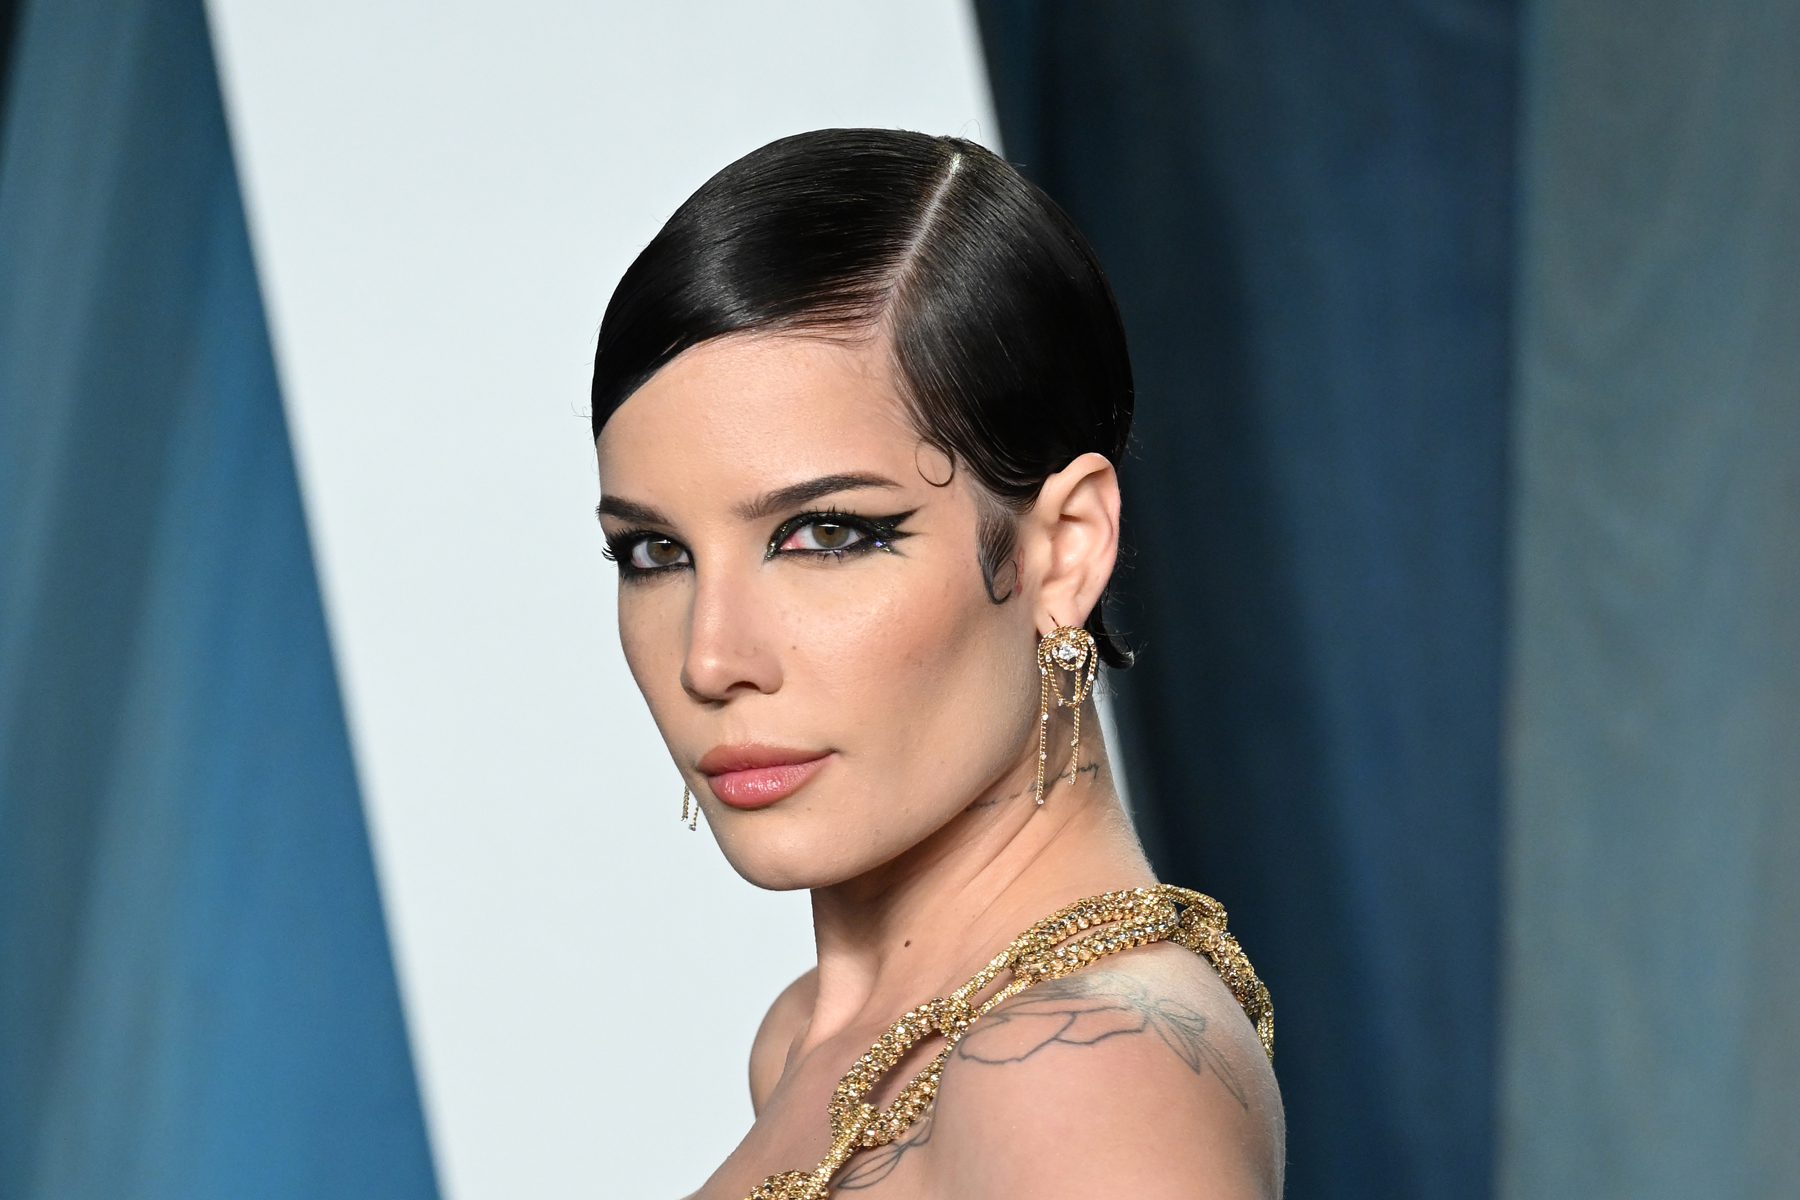 Halsey discusses how “My Abortion Saved my Life”: Halsey speaks out about Right to Choose Motherhood